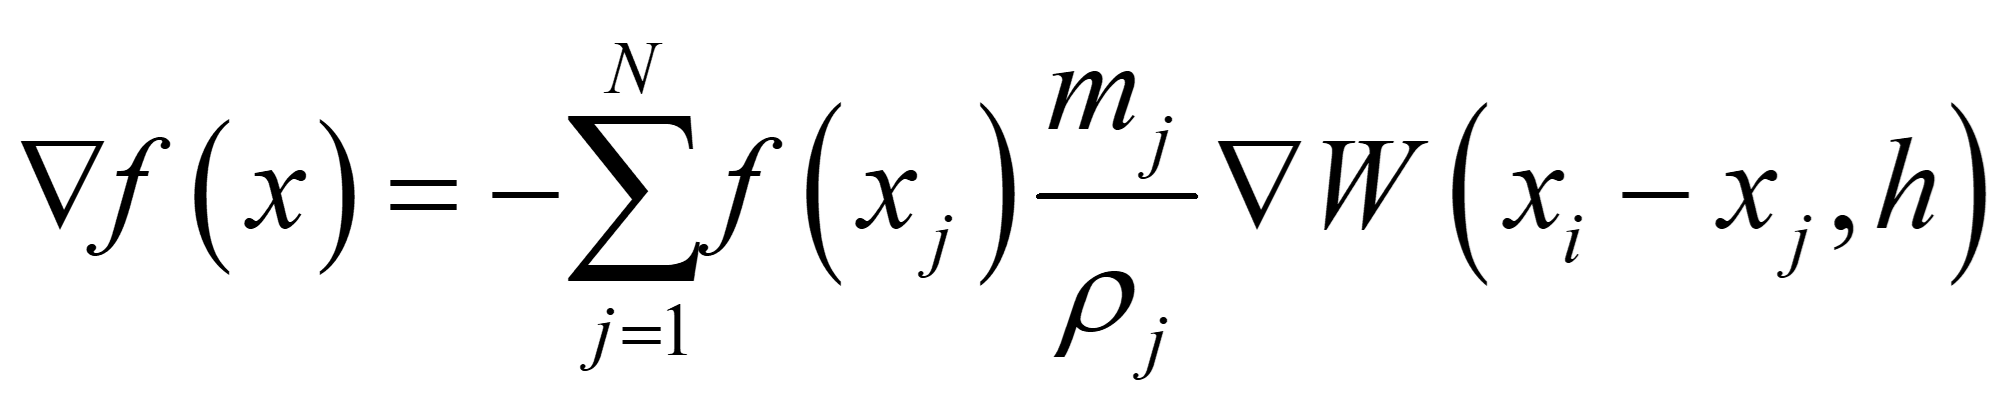 Particle approximation